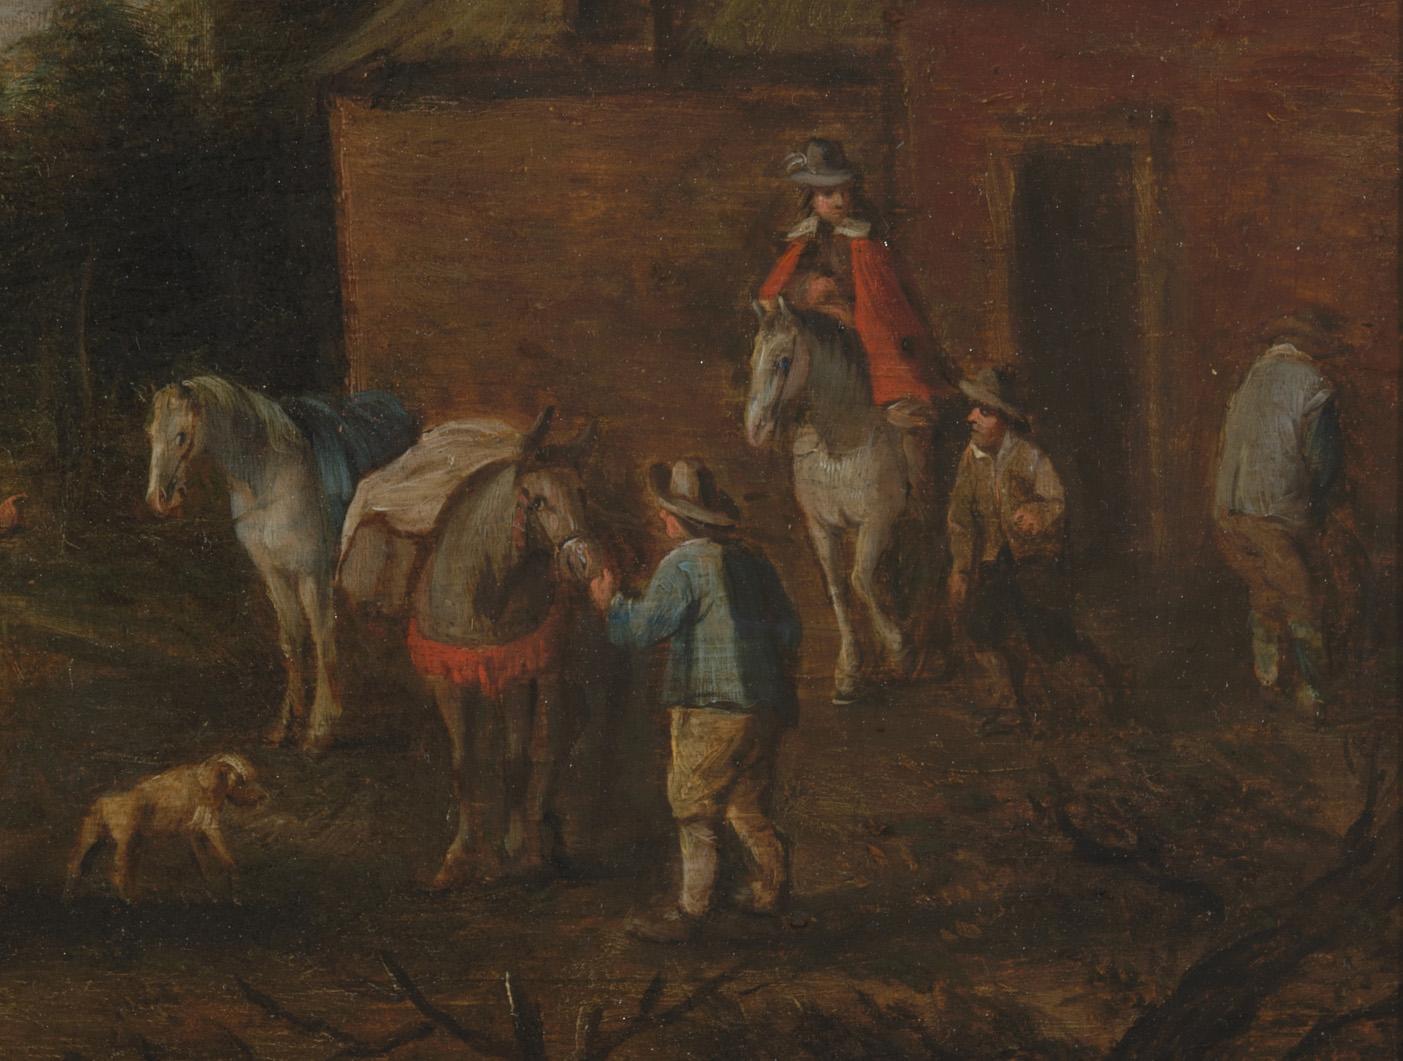 As the Dutch painter Philips Wouwerman often did, this artist painted travellers stopping at an inn or a farm. One of the men got off his horse to urinate against the facade of the building. The motif of a peeing man was far from an exception in